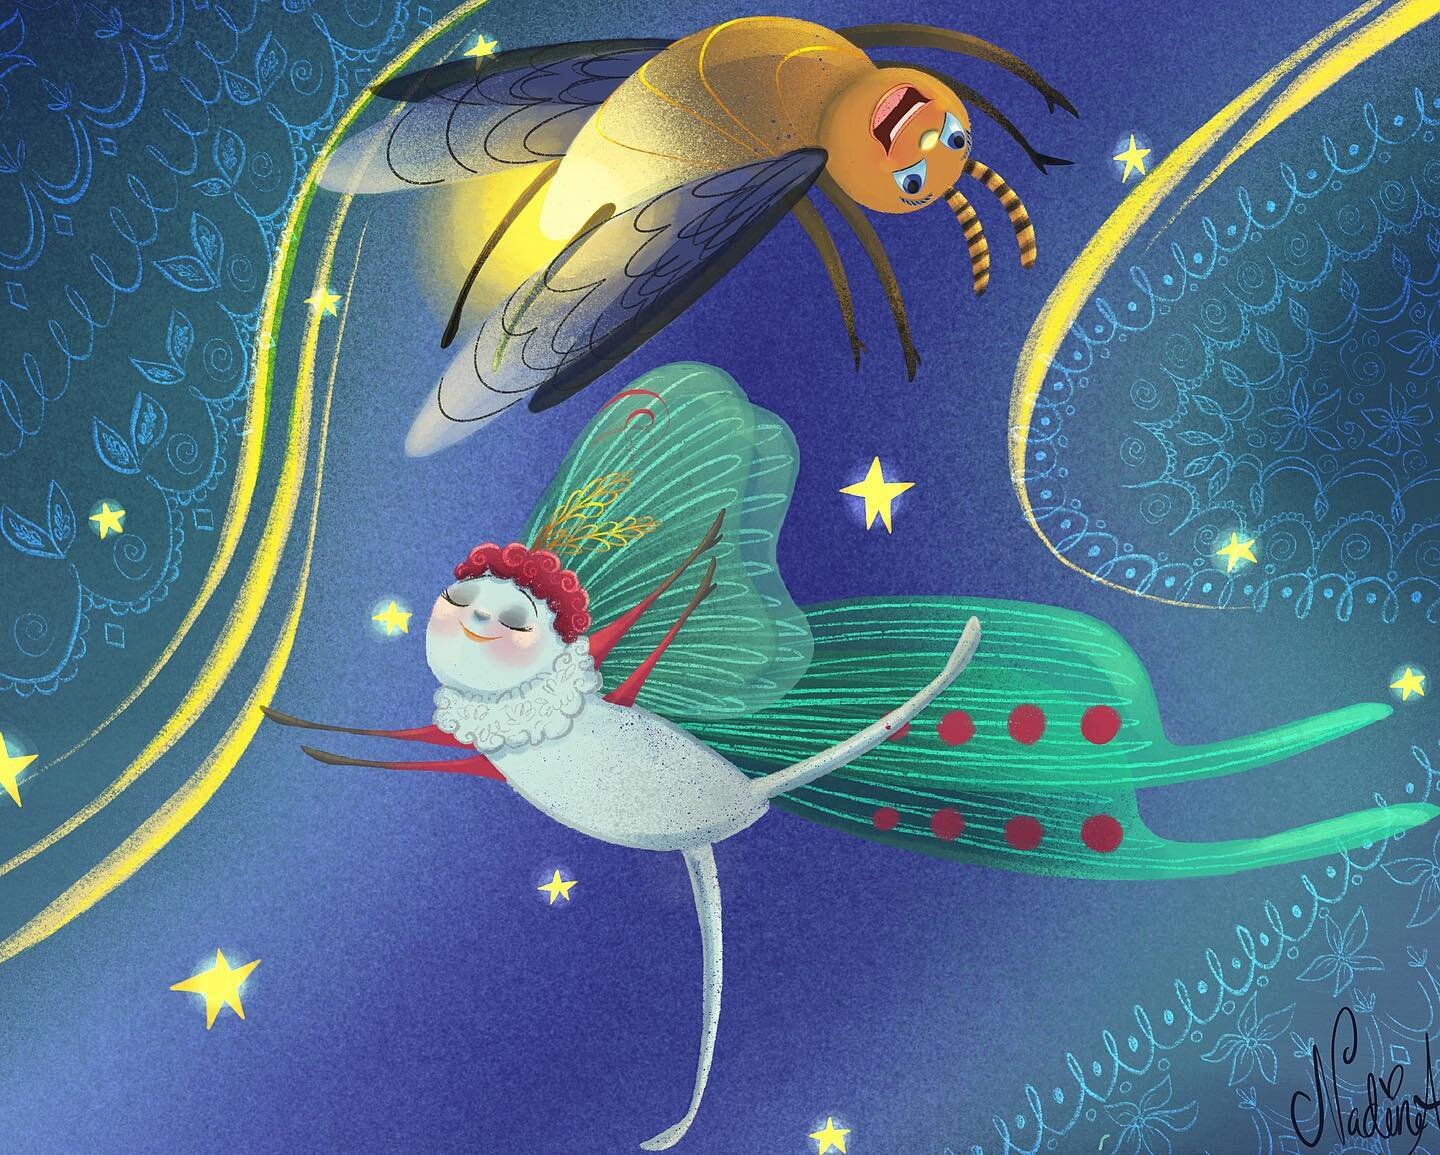 &ldquo;Then they try out their best acrobatics. Woo-hop!&rdquo; Shouted Lampy as he looped the loop.&rdquo; &ldquo;I bet you can touch the moon!&rdquo; Shouted Luna. 
🦋 
I couldn&rsquo;t resist another Lampy the firefly and Luna the moth drawing, it